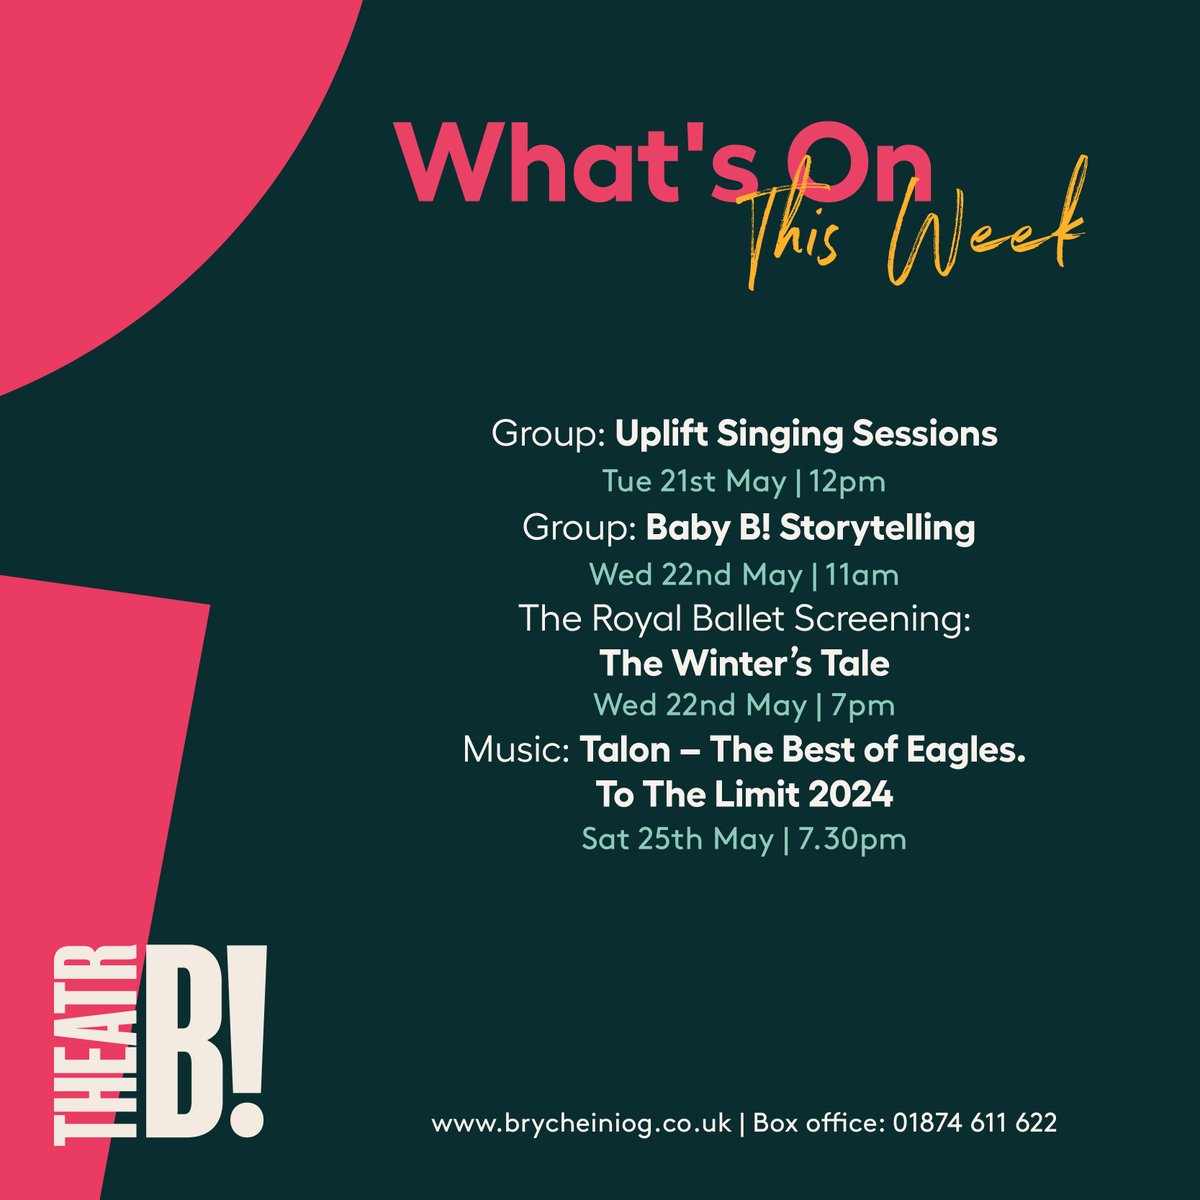 Check out what's on this week!

Plus, see our exciting lineup of shows at Theatr Brycheiniog. Open daily from 9am to 5pm. Book tickets online 24/7 at brycheiniog.co.uk.

Come and experience the joy and wonder of live theatre with us!

#TheatrBrycheiniog
#WhatsOn